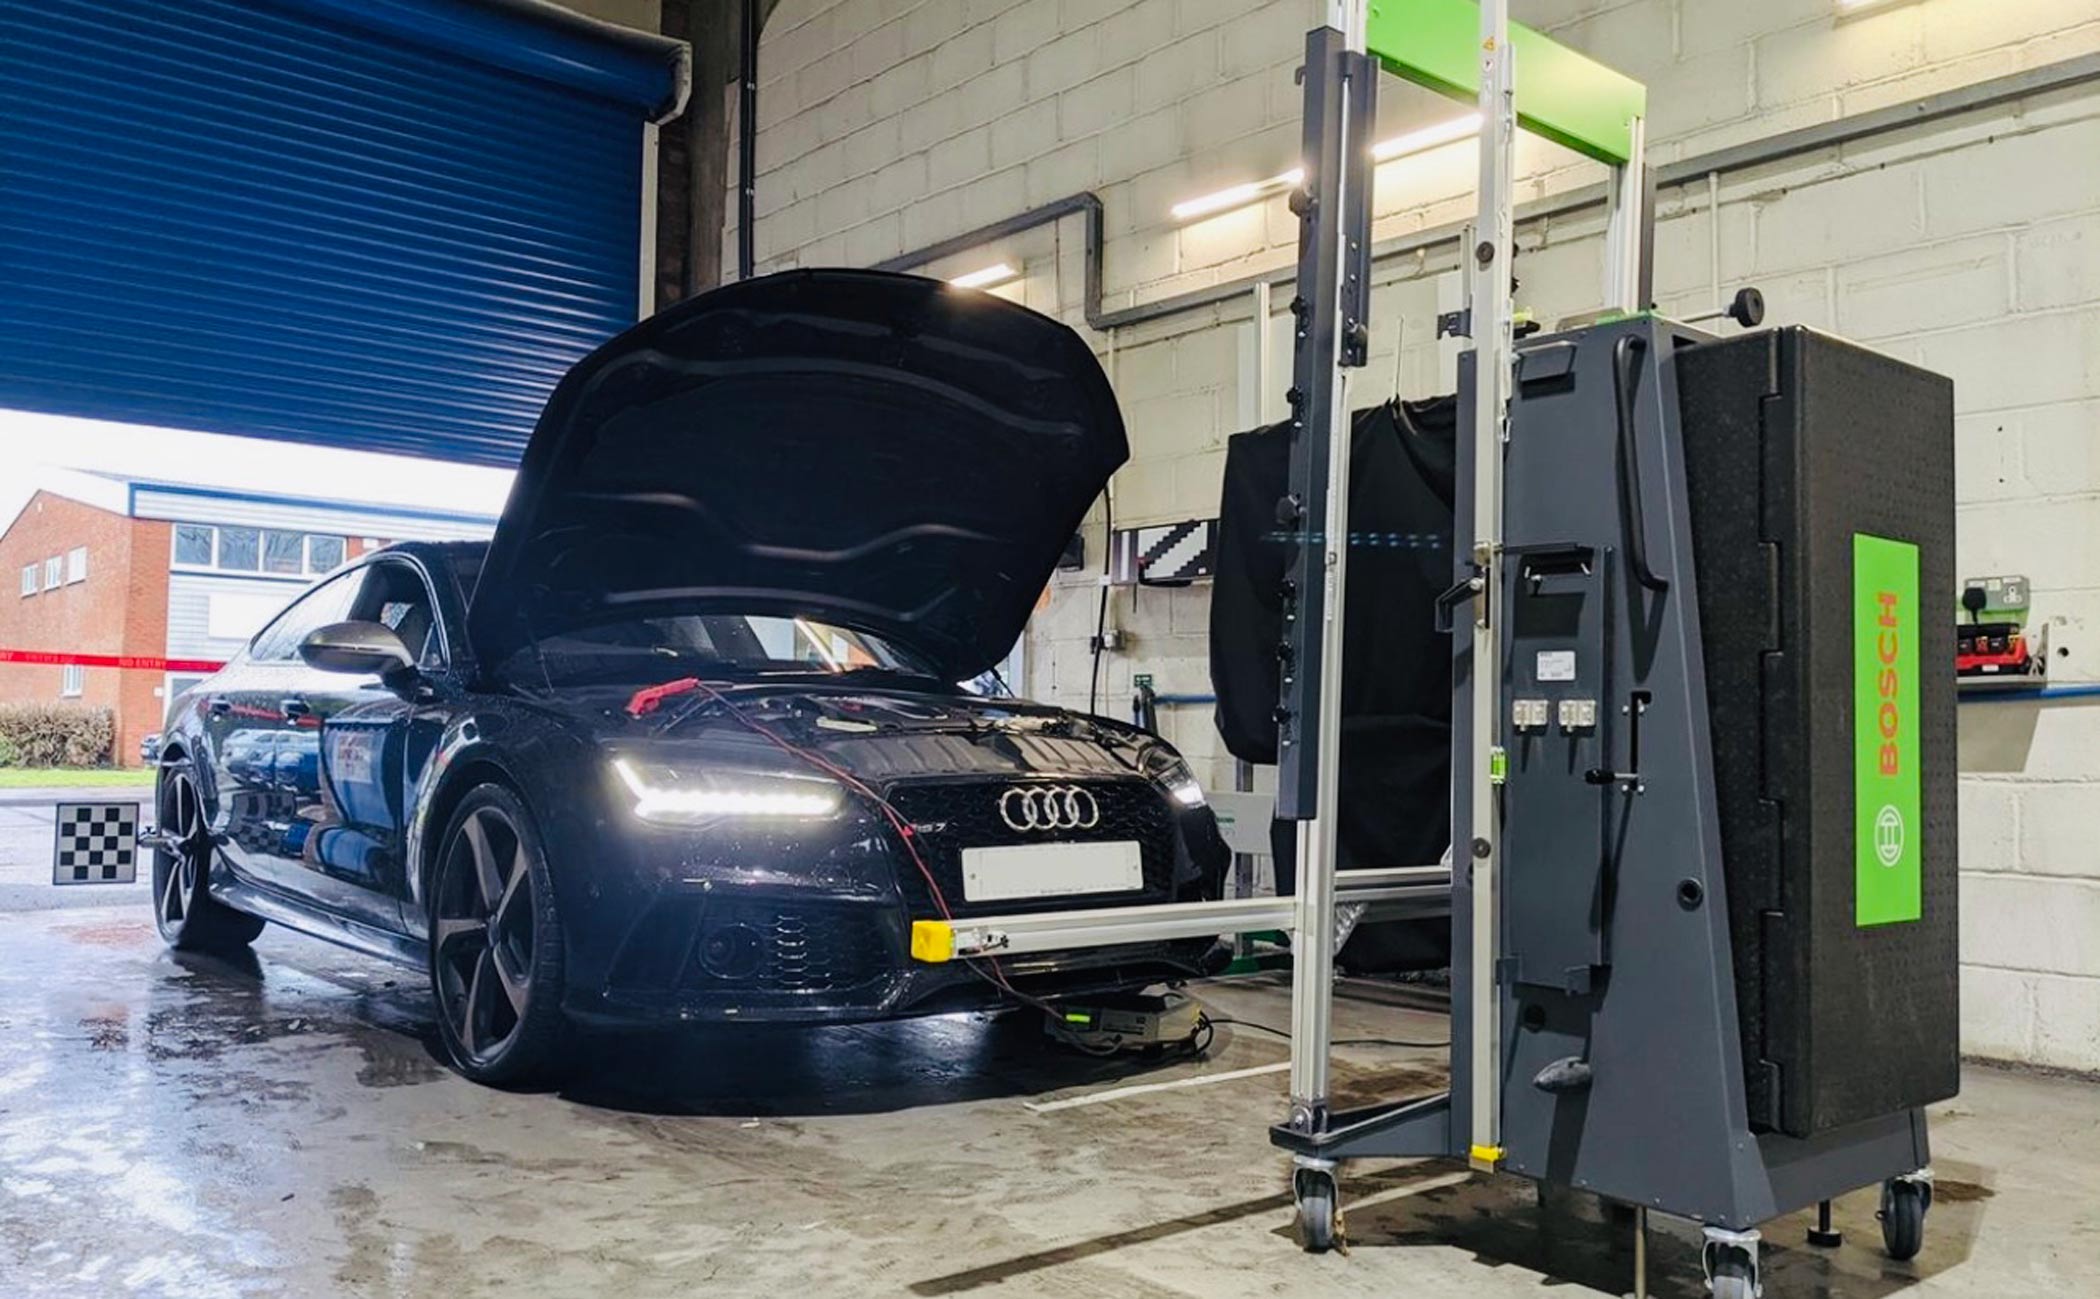 Wheel Alignment service done on audi by The BodyCentre.